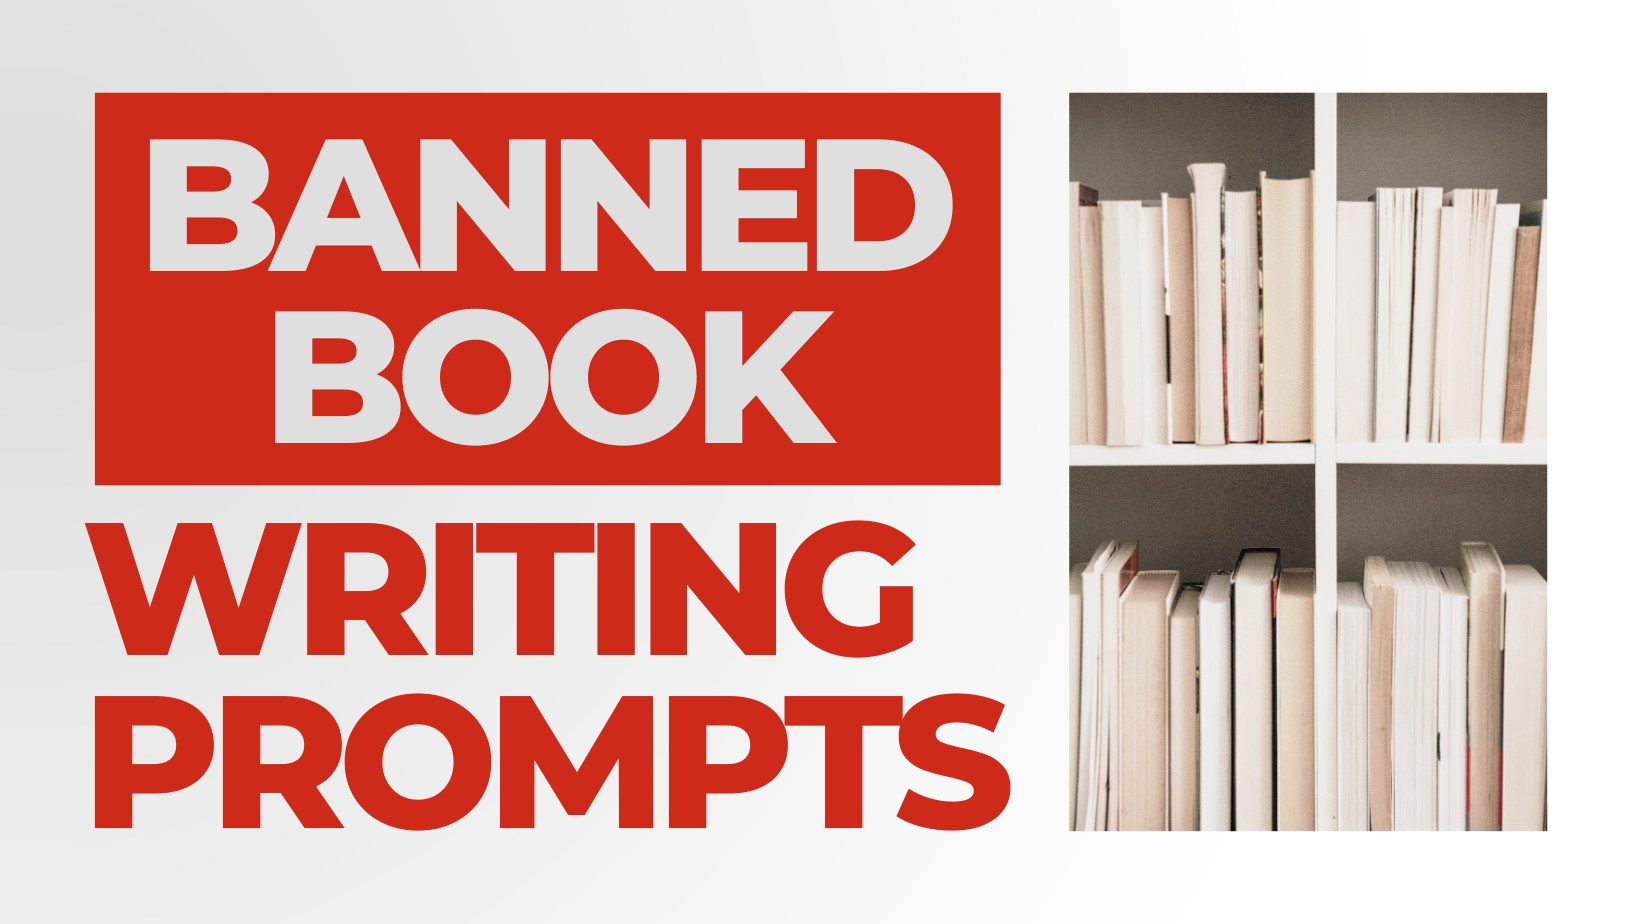 Banned Book Writing Prompts